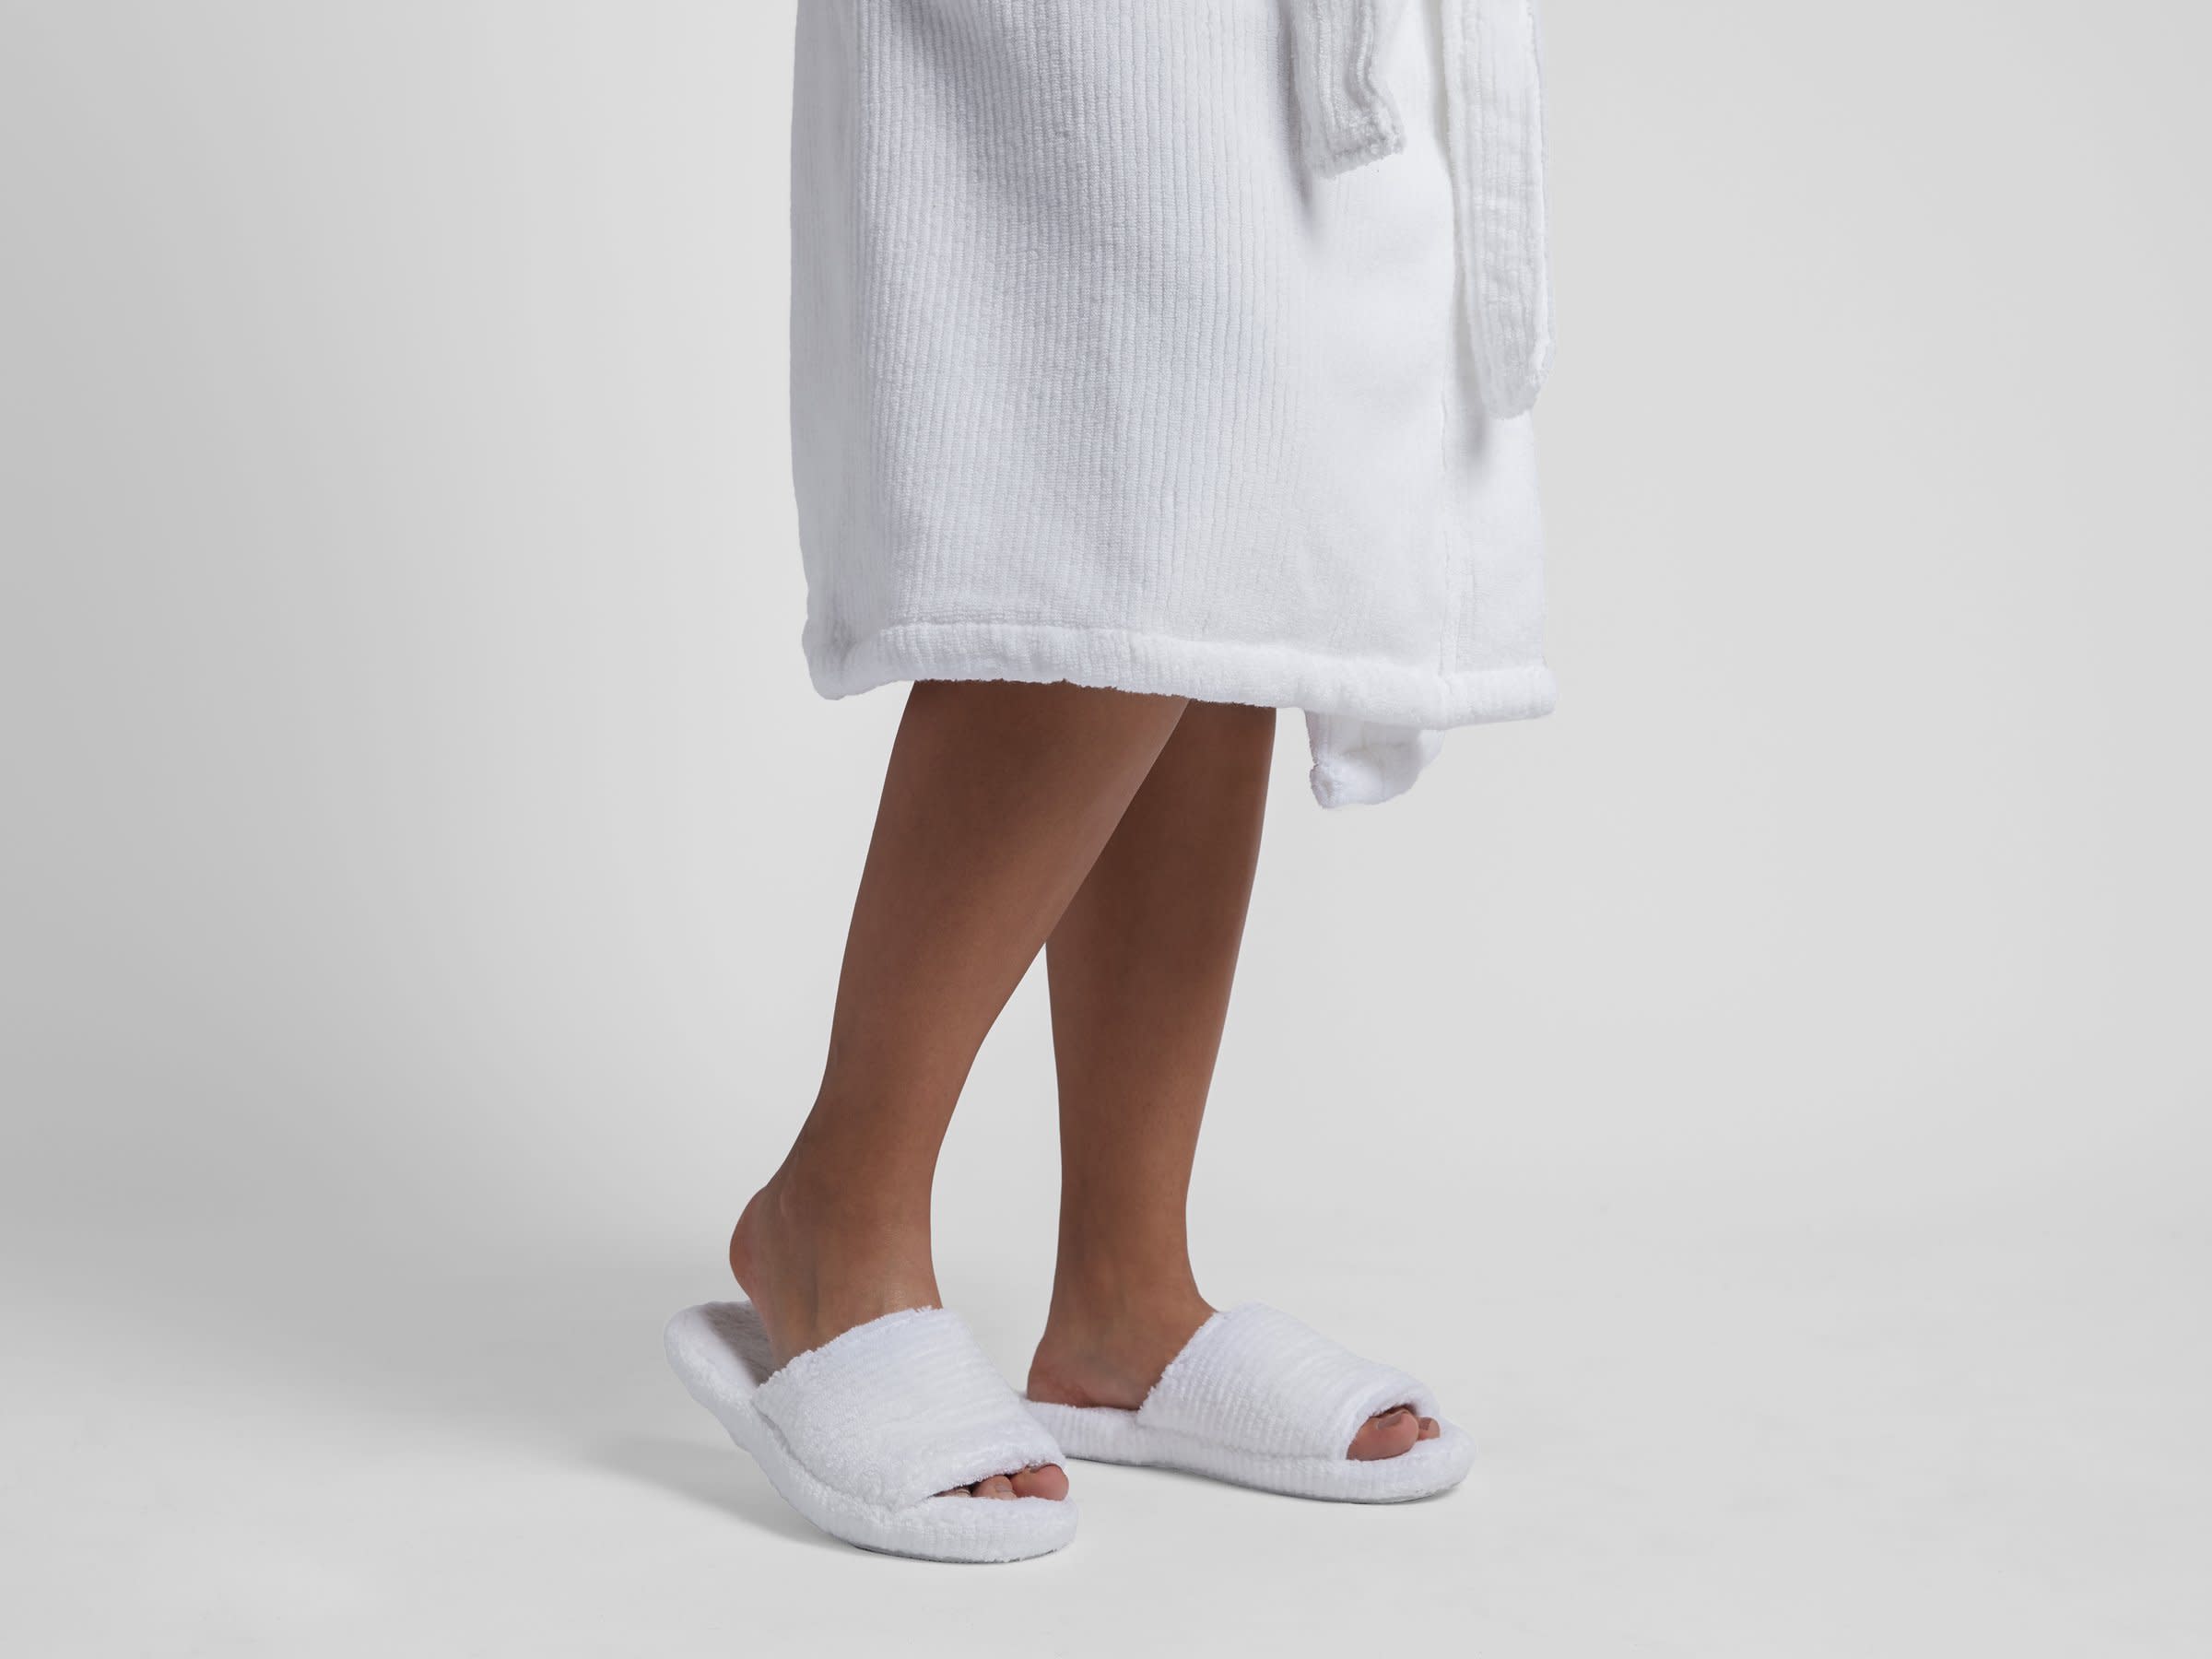 White Soft Rib Slippers Shown In A Room